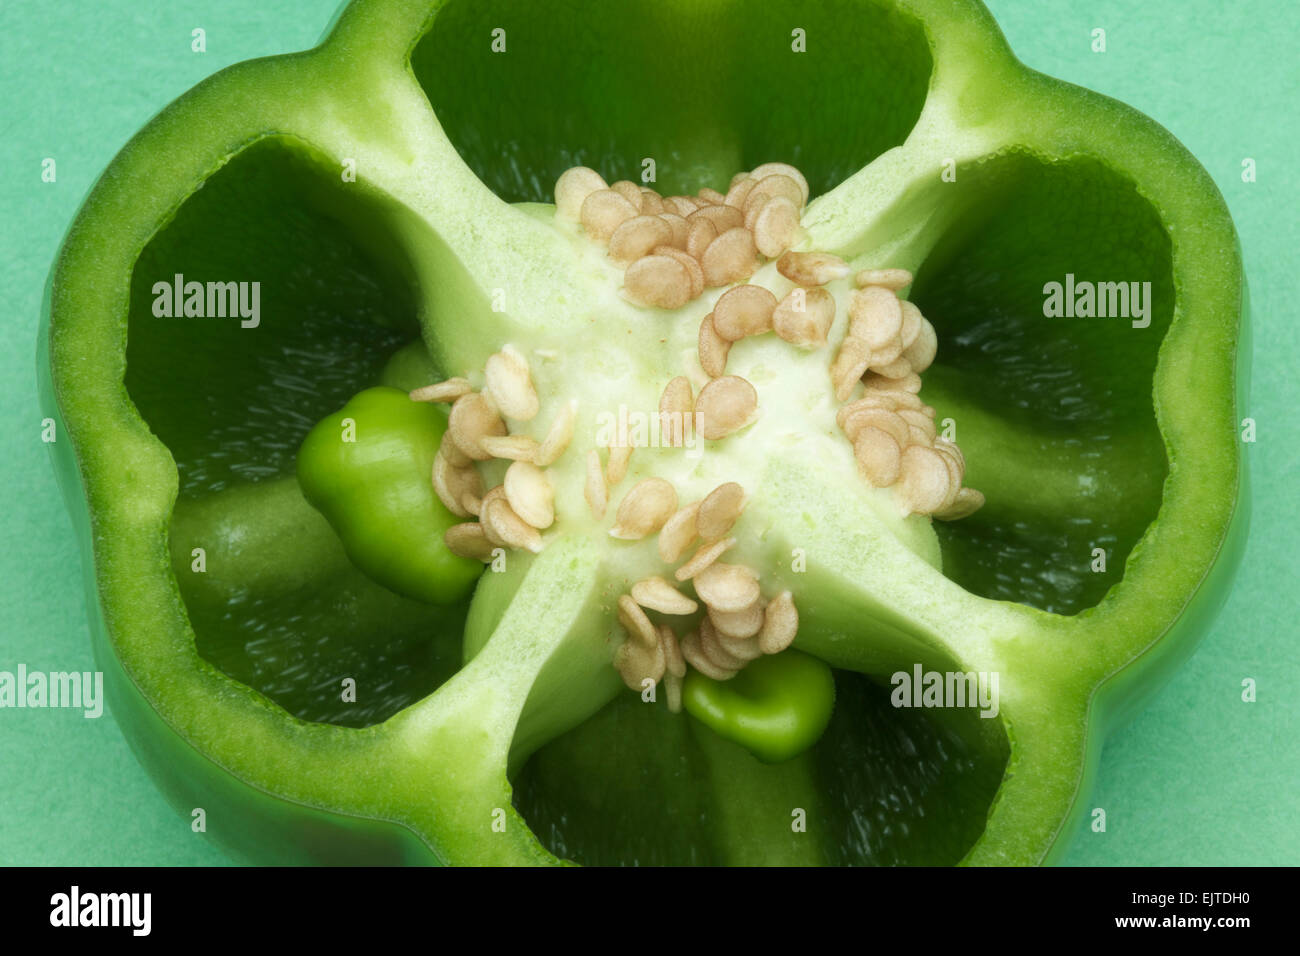 Green Bell Pepper on a green background Stock Photo